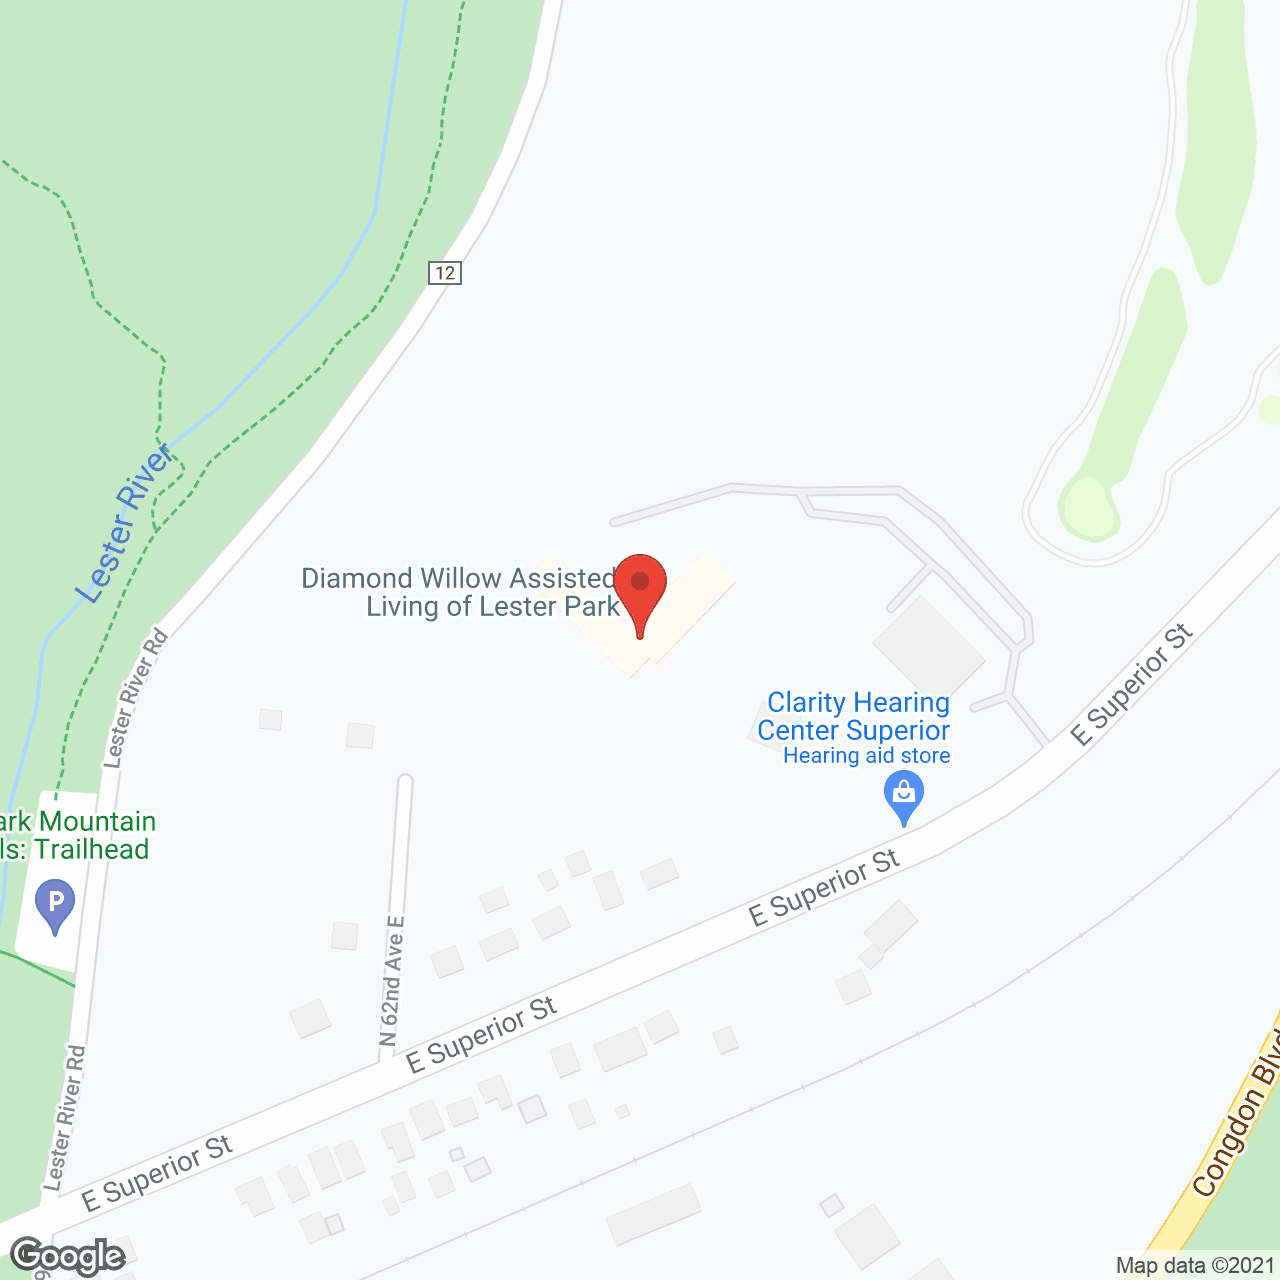 Diamond Willow Assisted Living of Lester Park in google map